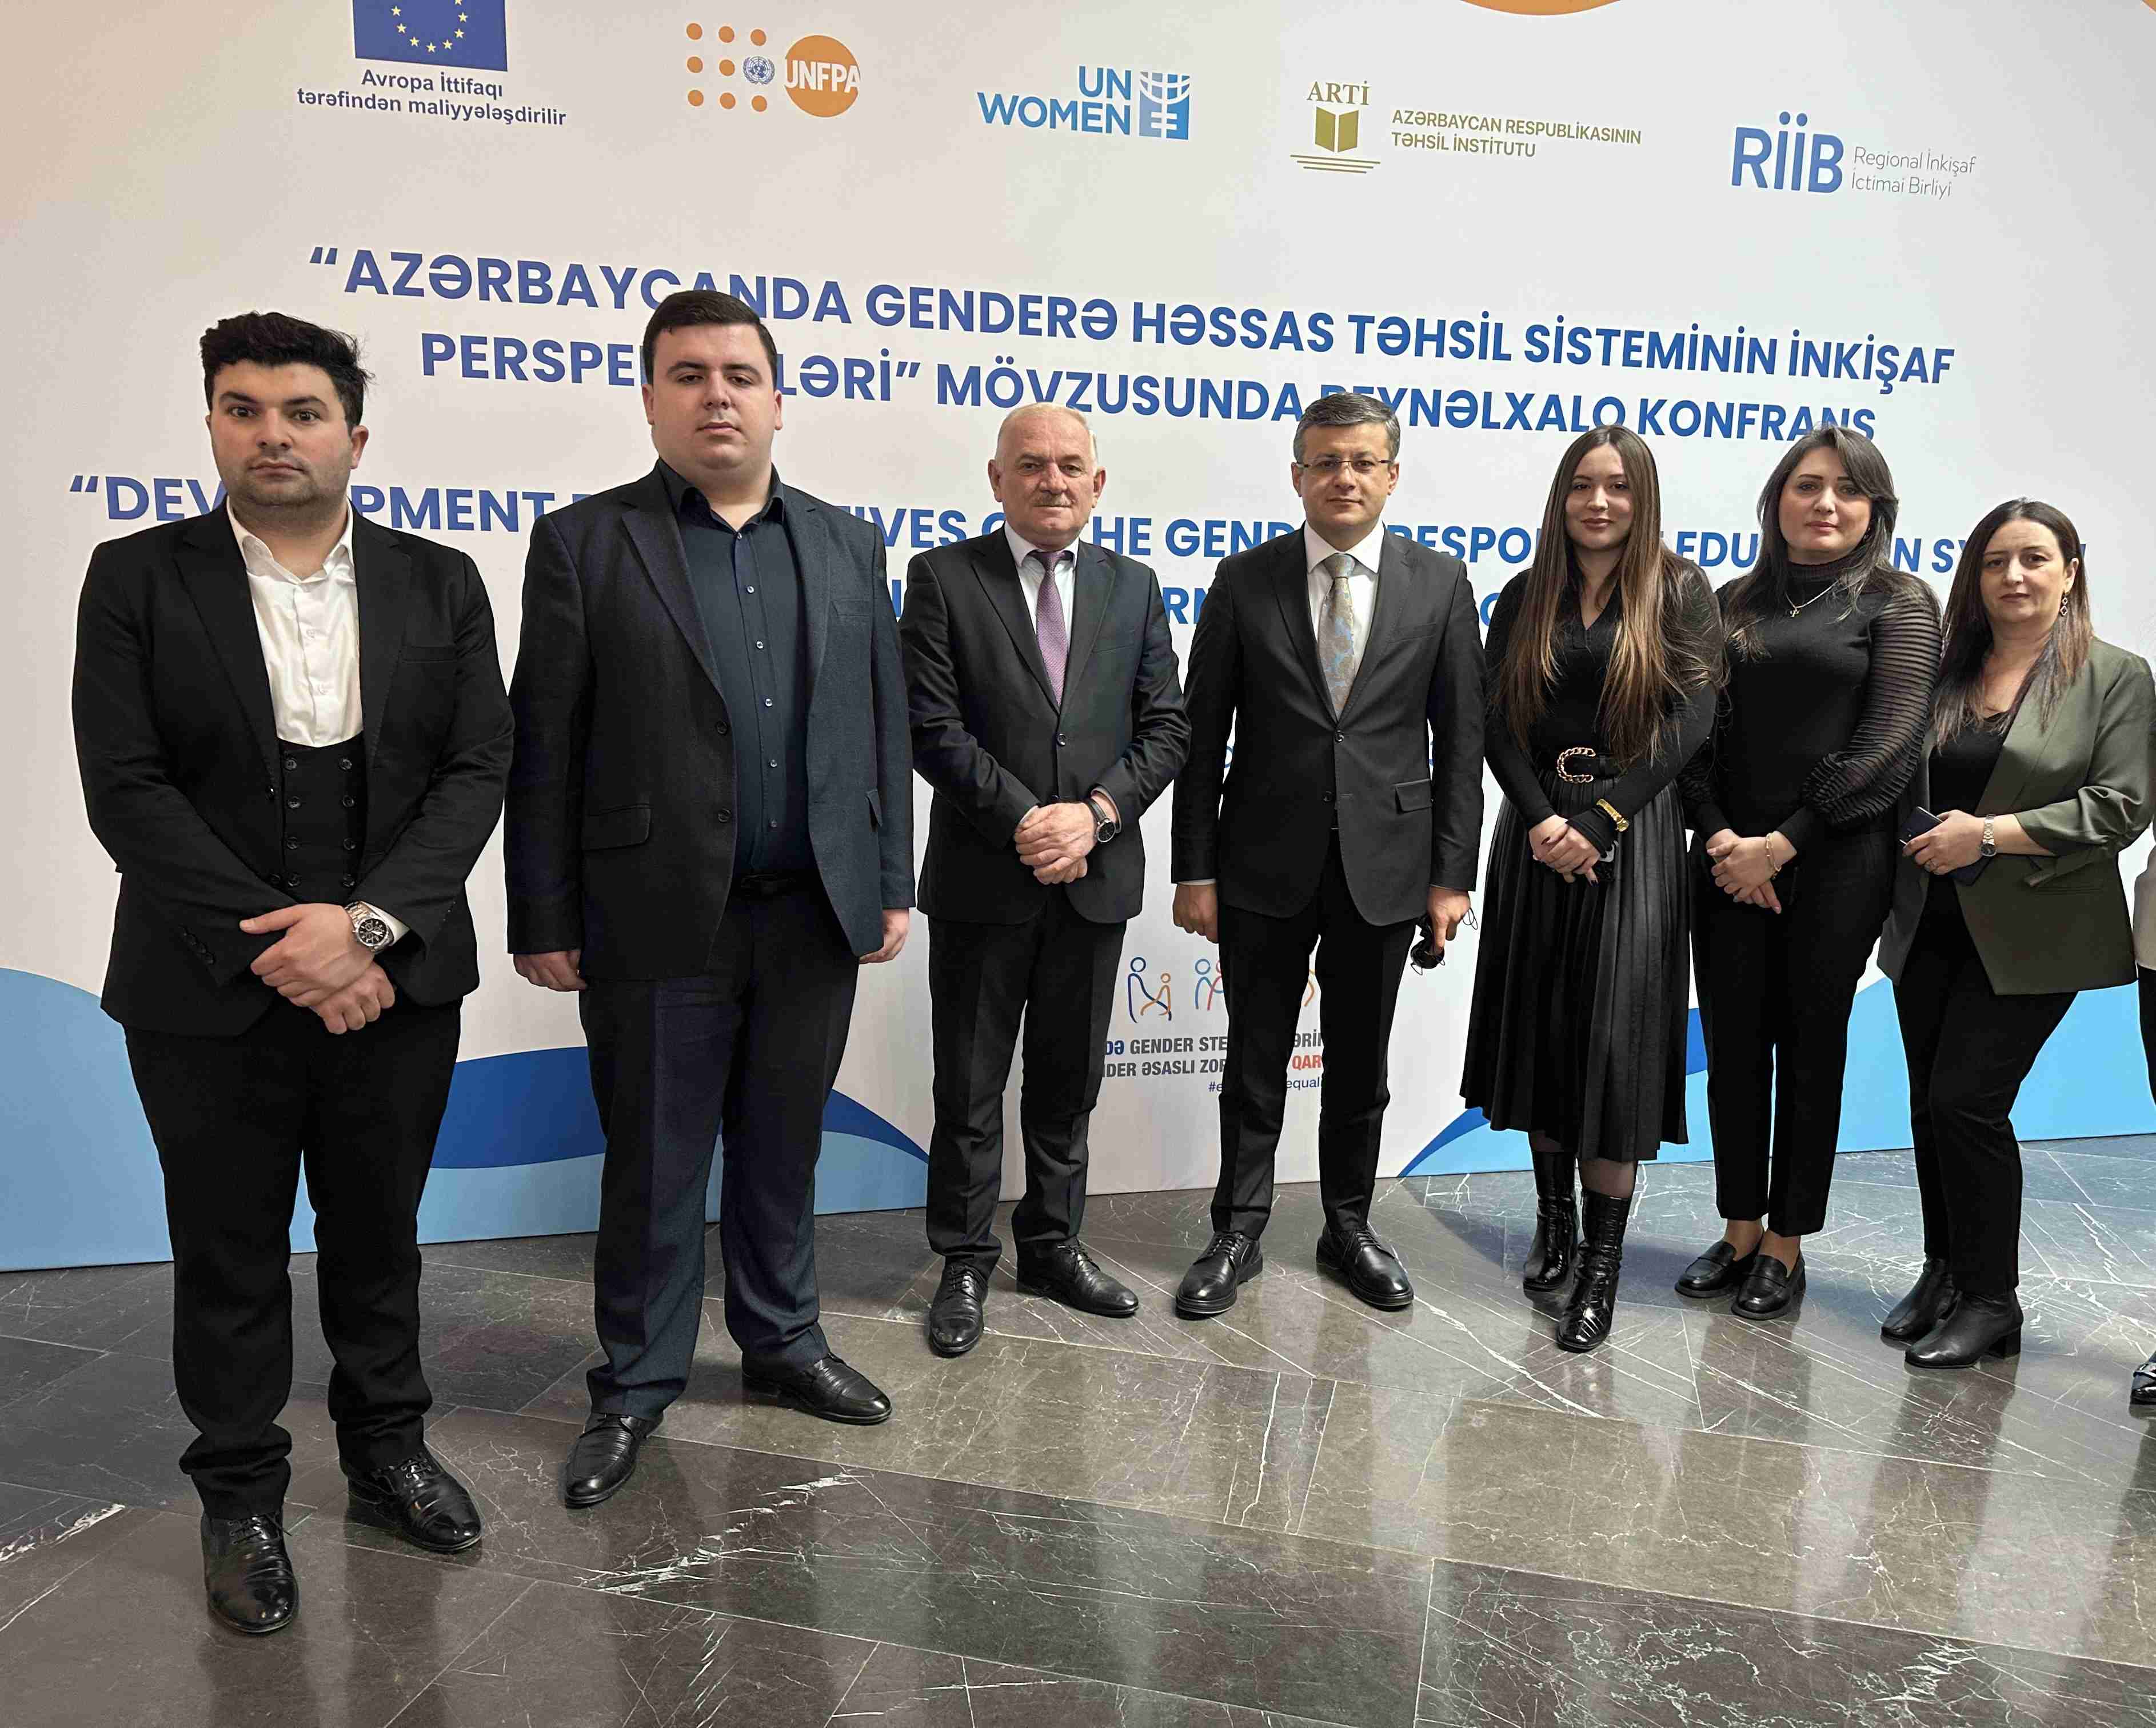 Employees of Odlar Yurdu University participated in the international conference on "Development prospects of the gender-sensitive education system in Azerbaijan"